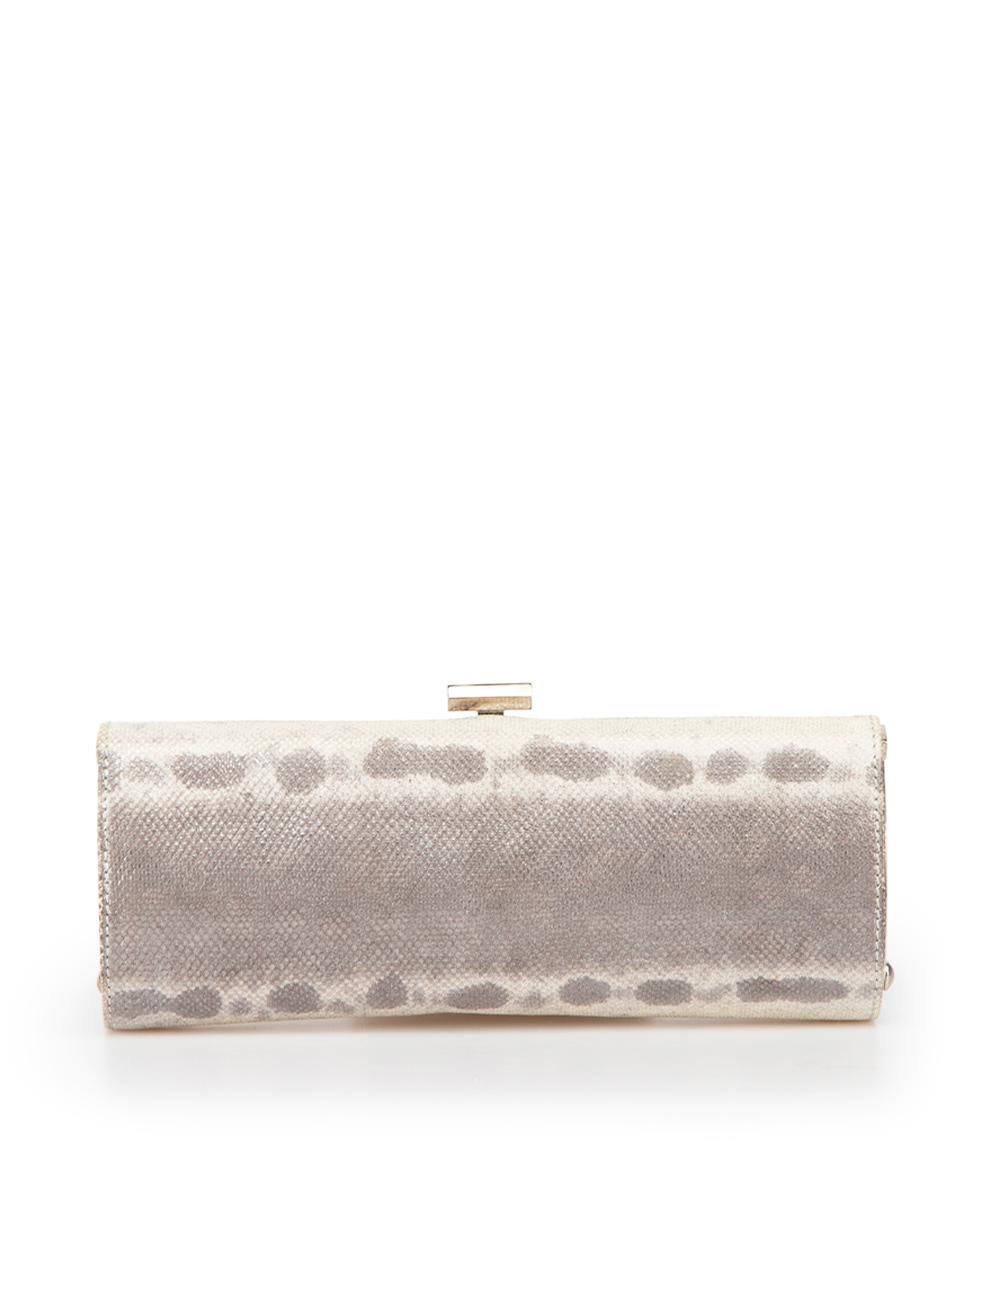 Jimmy Choo Silver Snake Embossed Barrel Clutch In Excellent Condition For Sale In London, GB